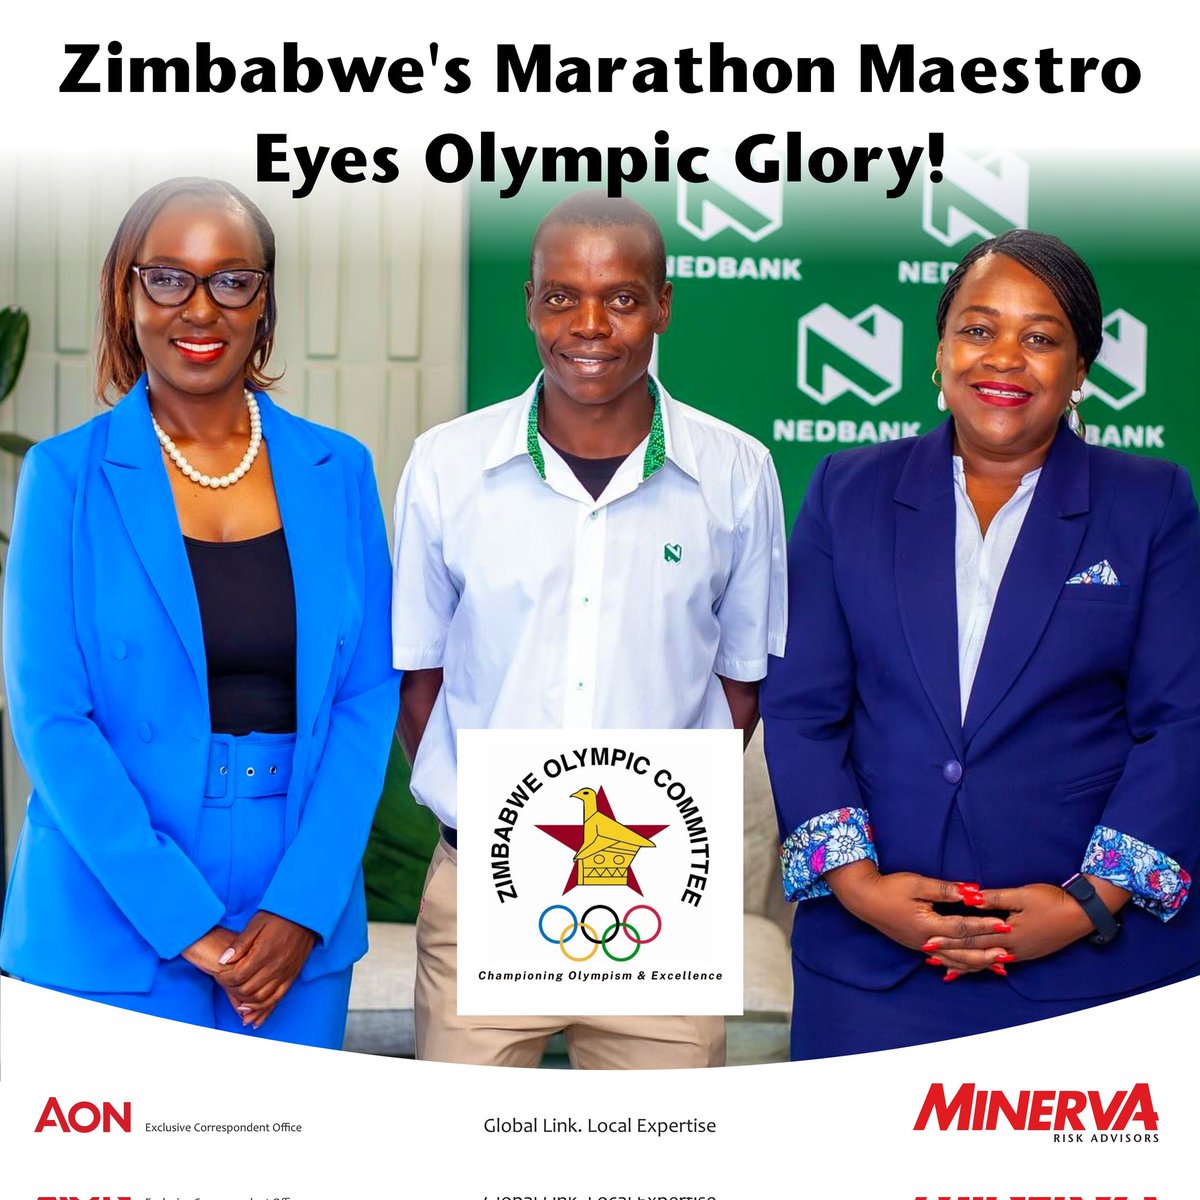 Meet Isaac Mpofu: A name synonymous with grit and excellence in the marathon world. One of two Zimbabwean athletes to qualify for the Olympics. As Paris 2024 draws near, Isaac is gearing up to shine on the global stage, carrying his nation's pride with him every step of the way.